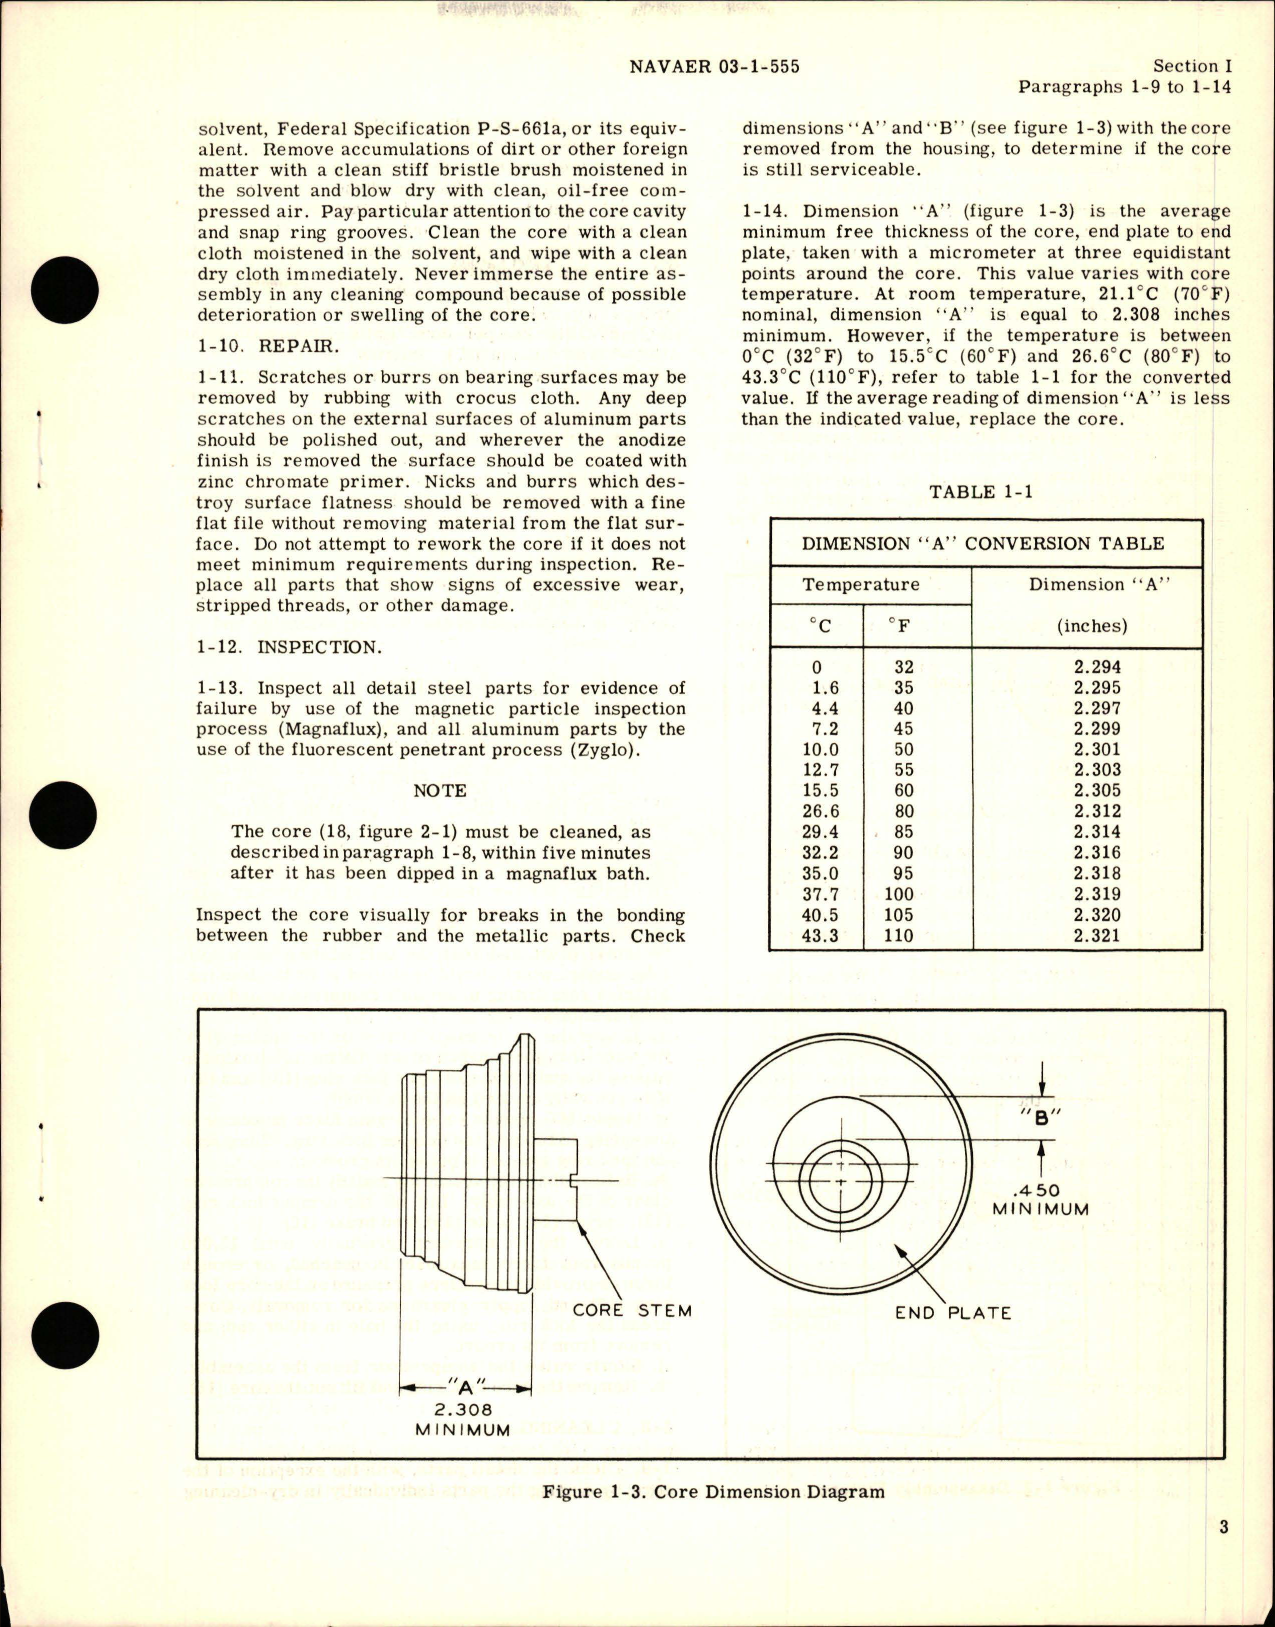 Sample page 5 from AirCorps Library document: Overhaul Instructions with Parts Catalog for Flexible Lightweight Engine Mounts - Model MB-2769 and MB-2770 